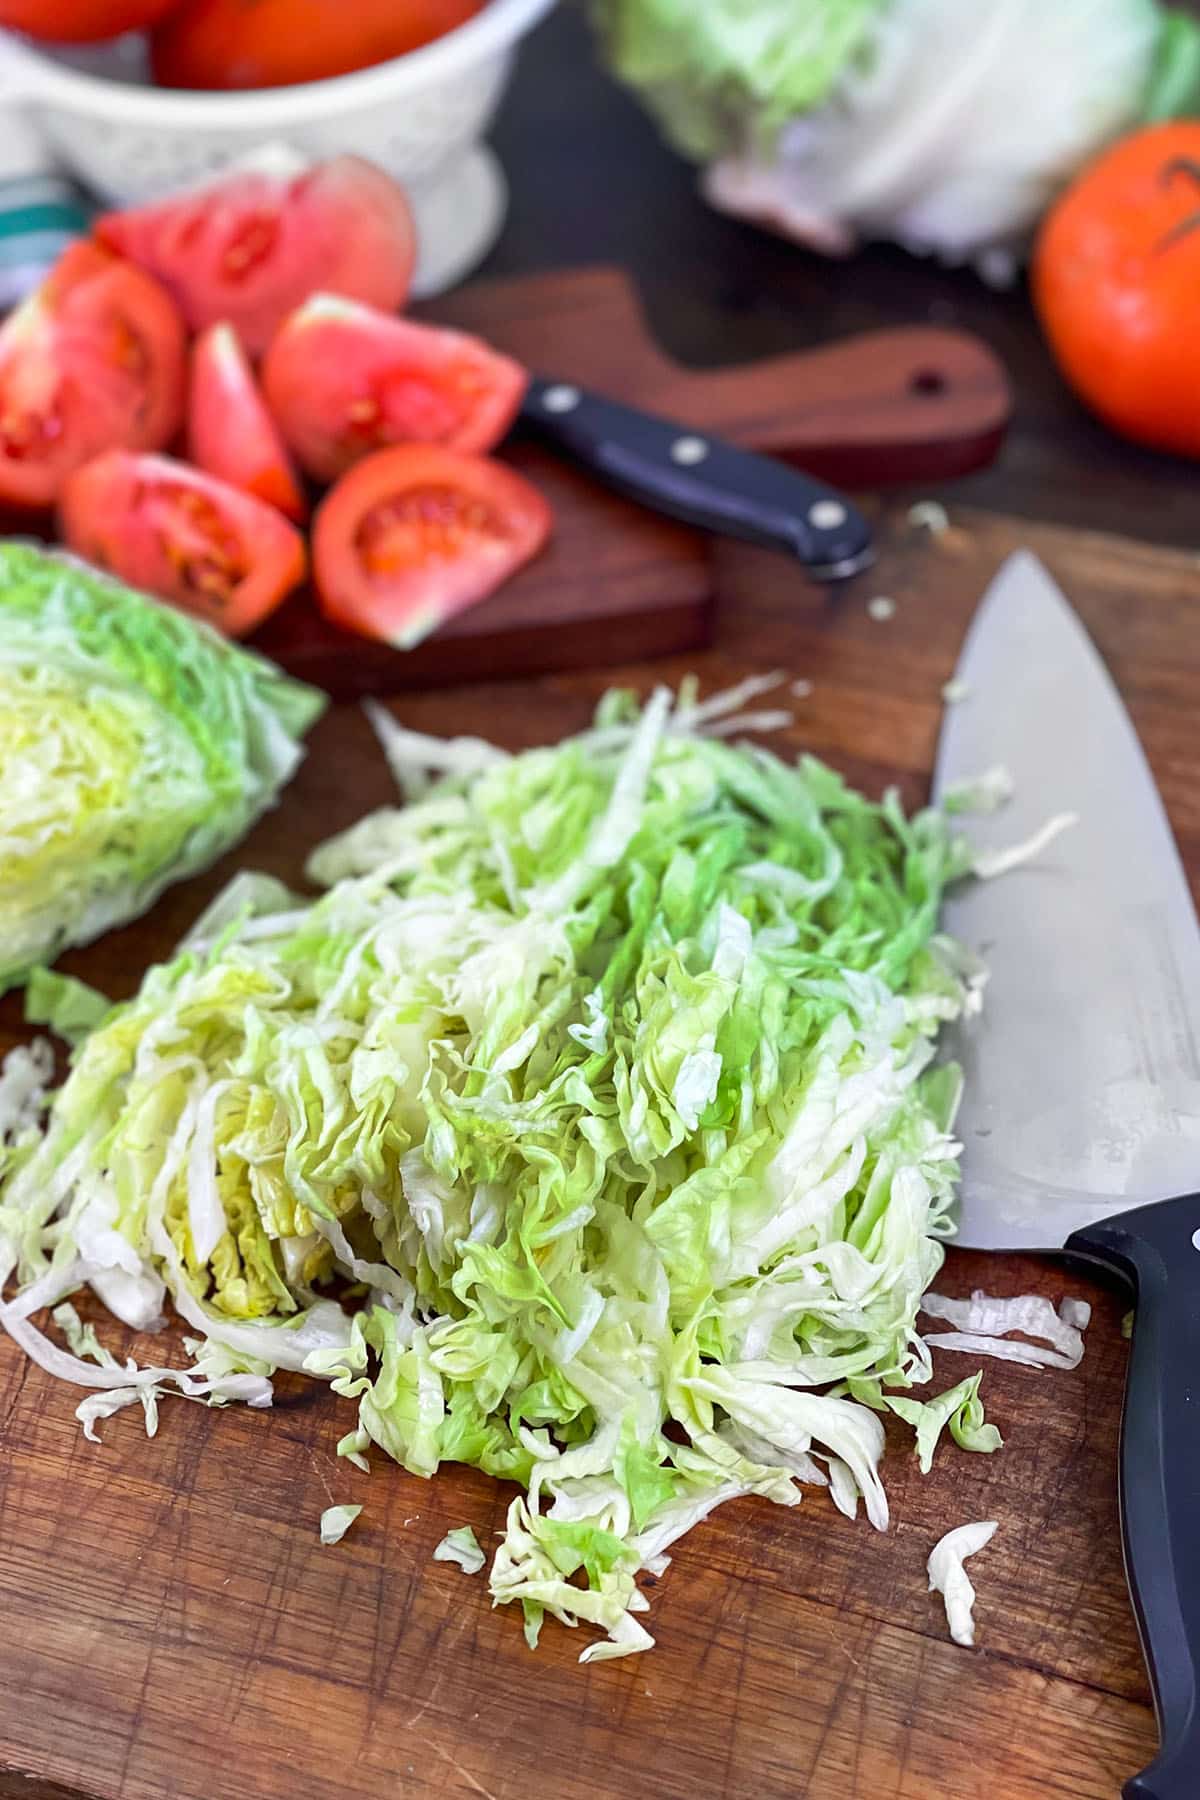 How to Shred Lettuce